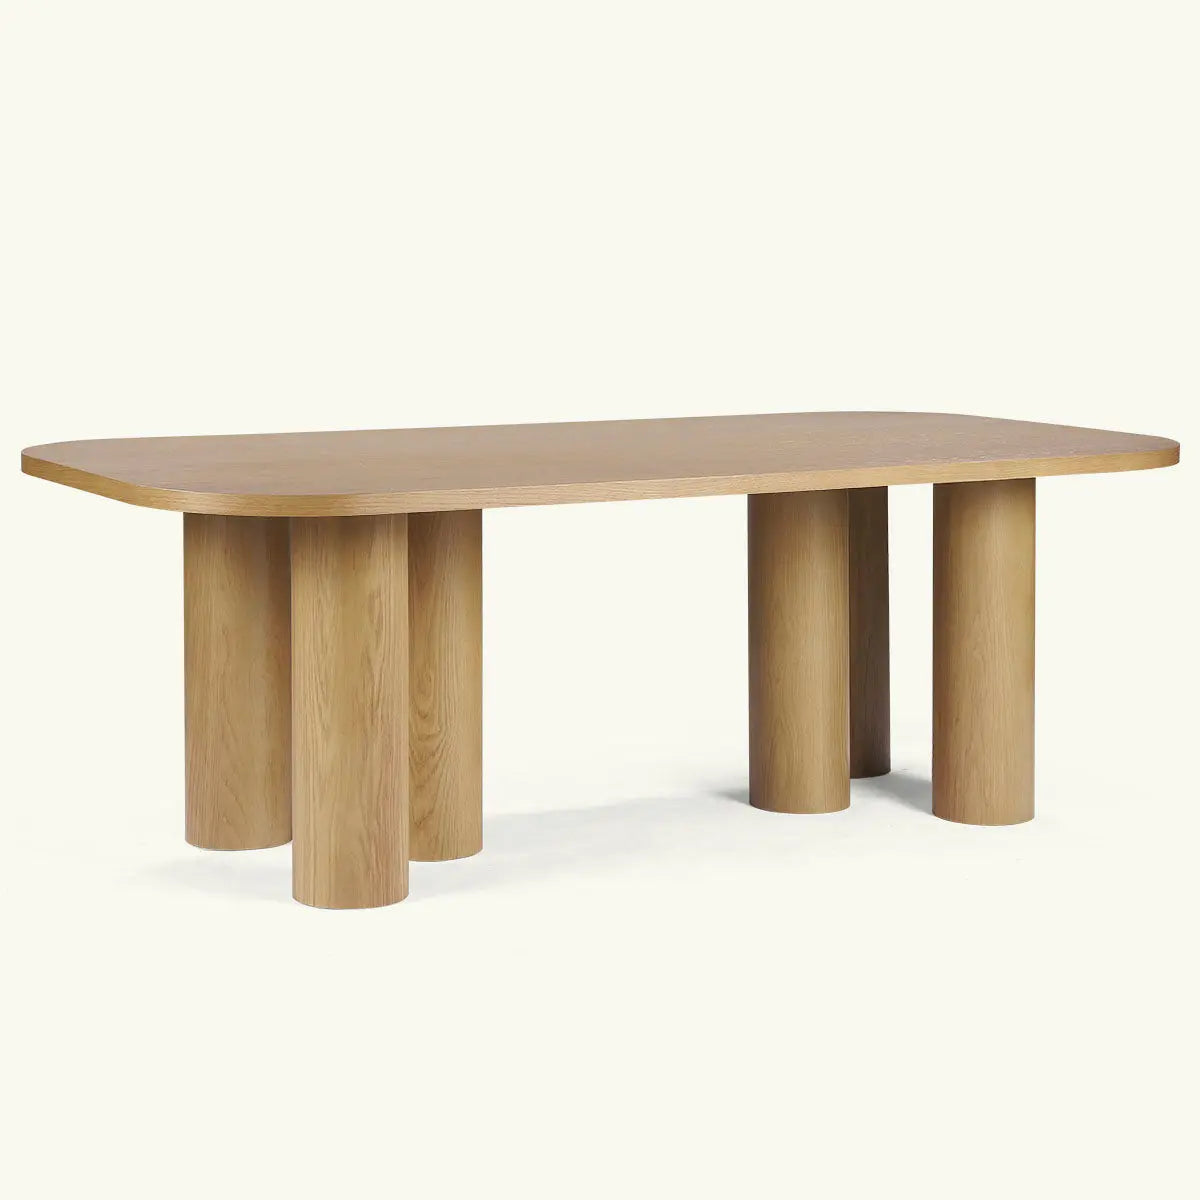 Baguette 62.5"White Oak 8 Seater Dining Table, Extra Large, Securely Rounded Corners, Easy Assembly, Perfect for Gatherings The Pop Maison